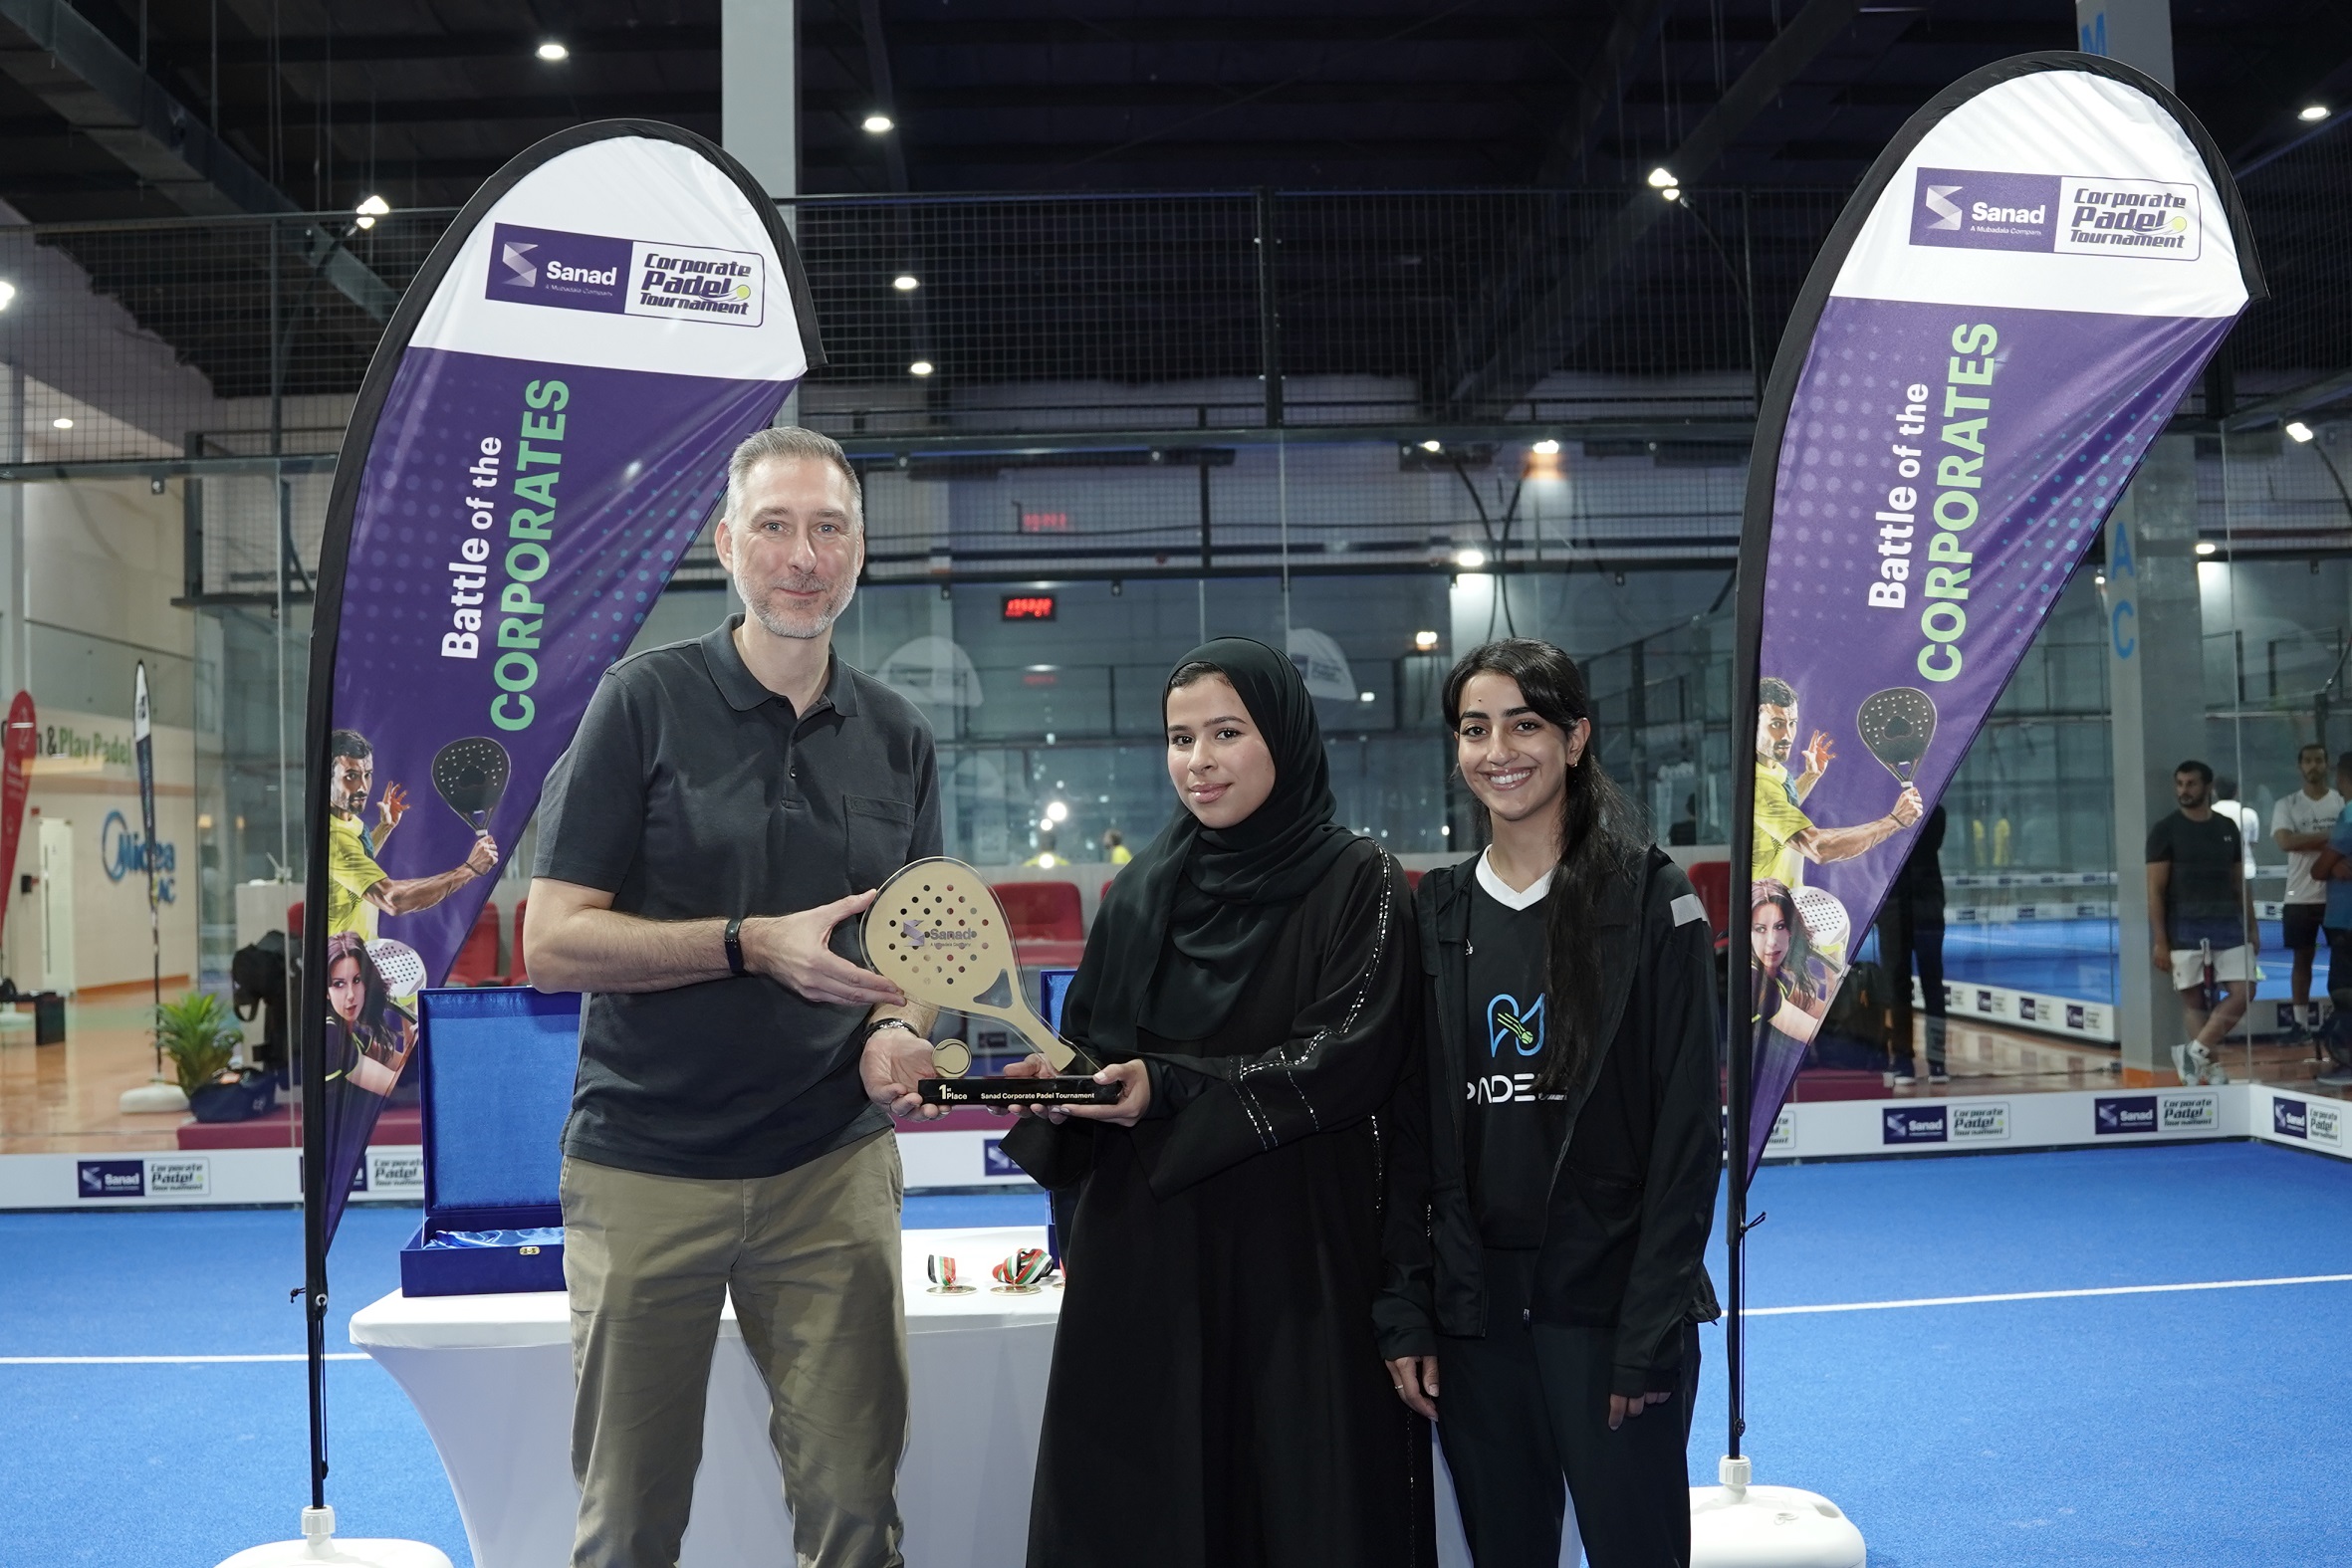 SANAD HOSTS ITS FIRST CORPORATE PADEL TOURNAMENT